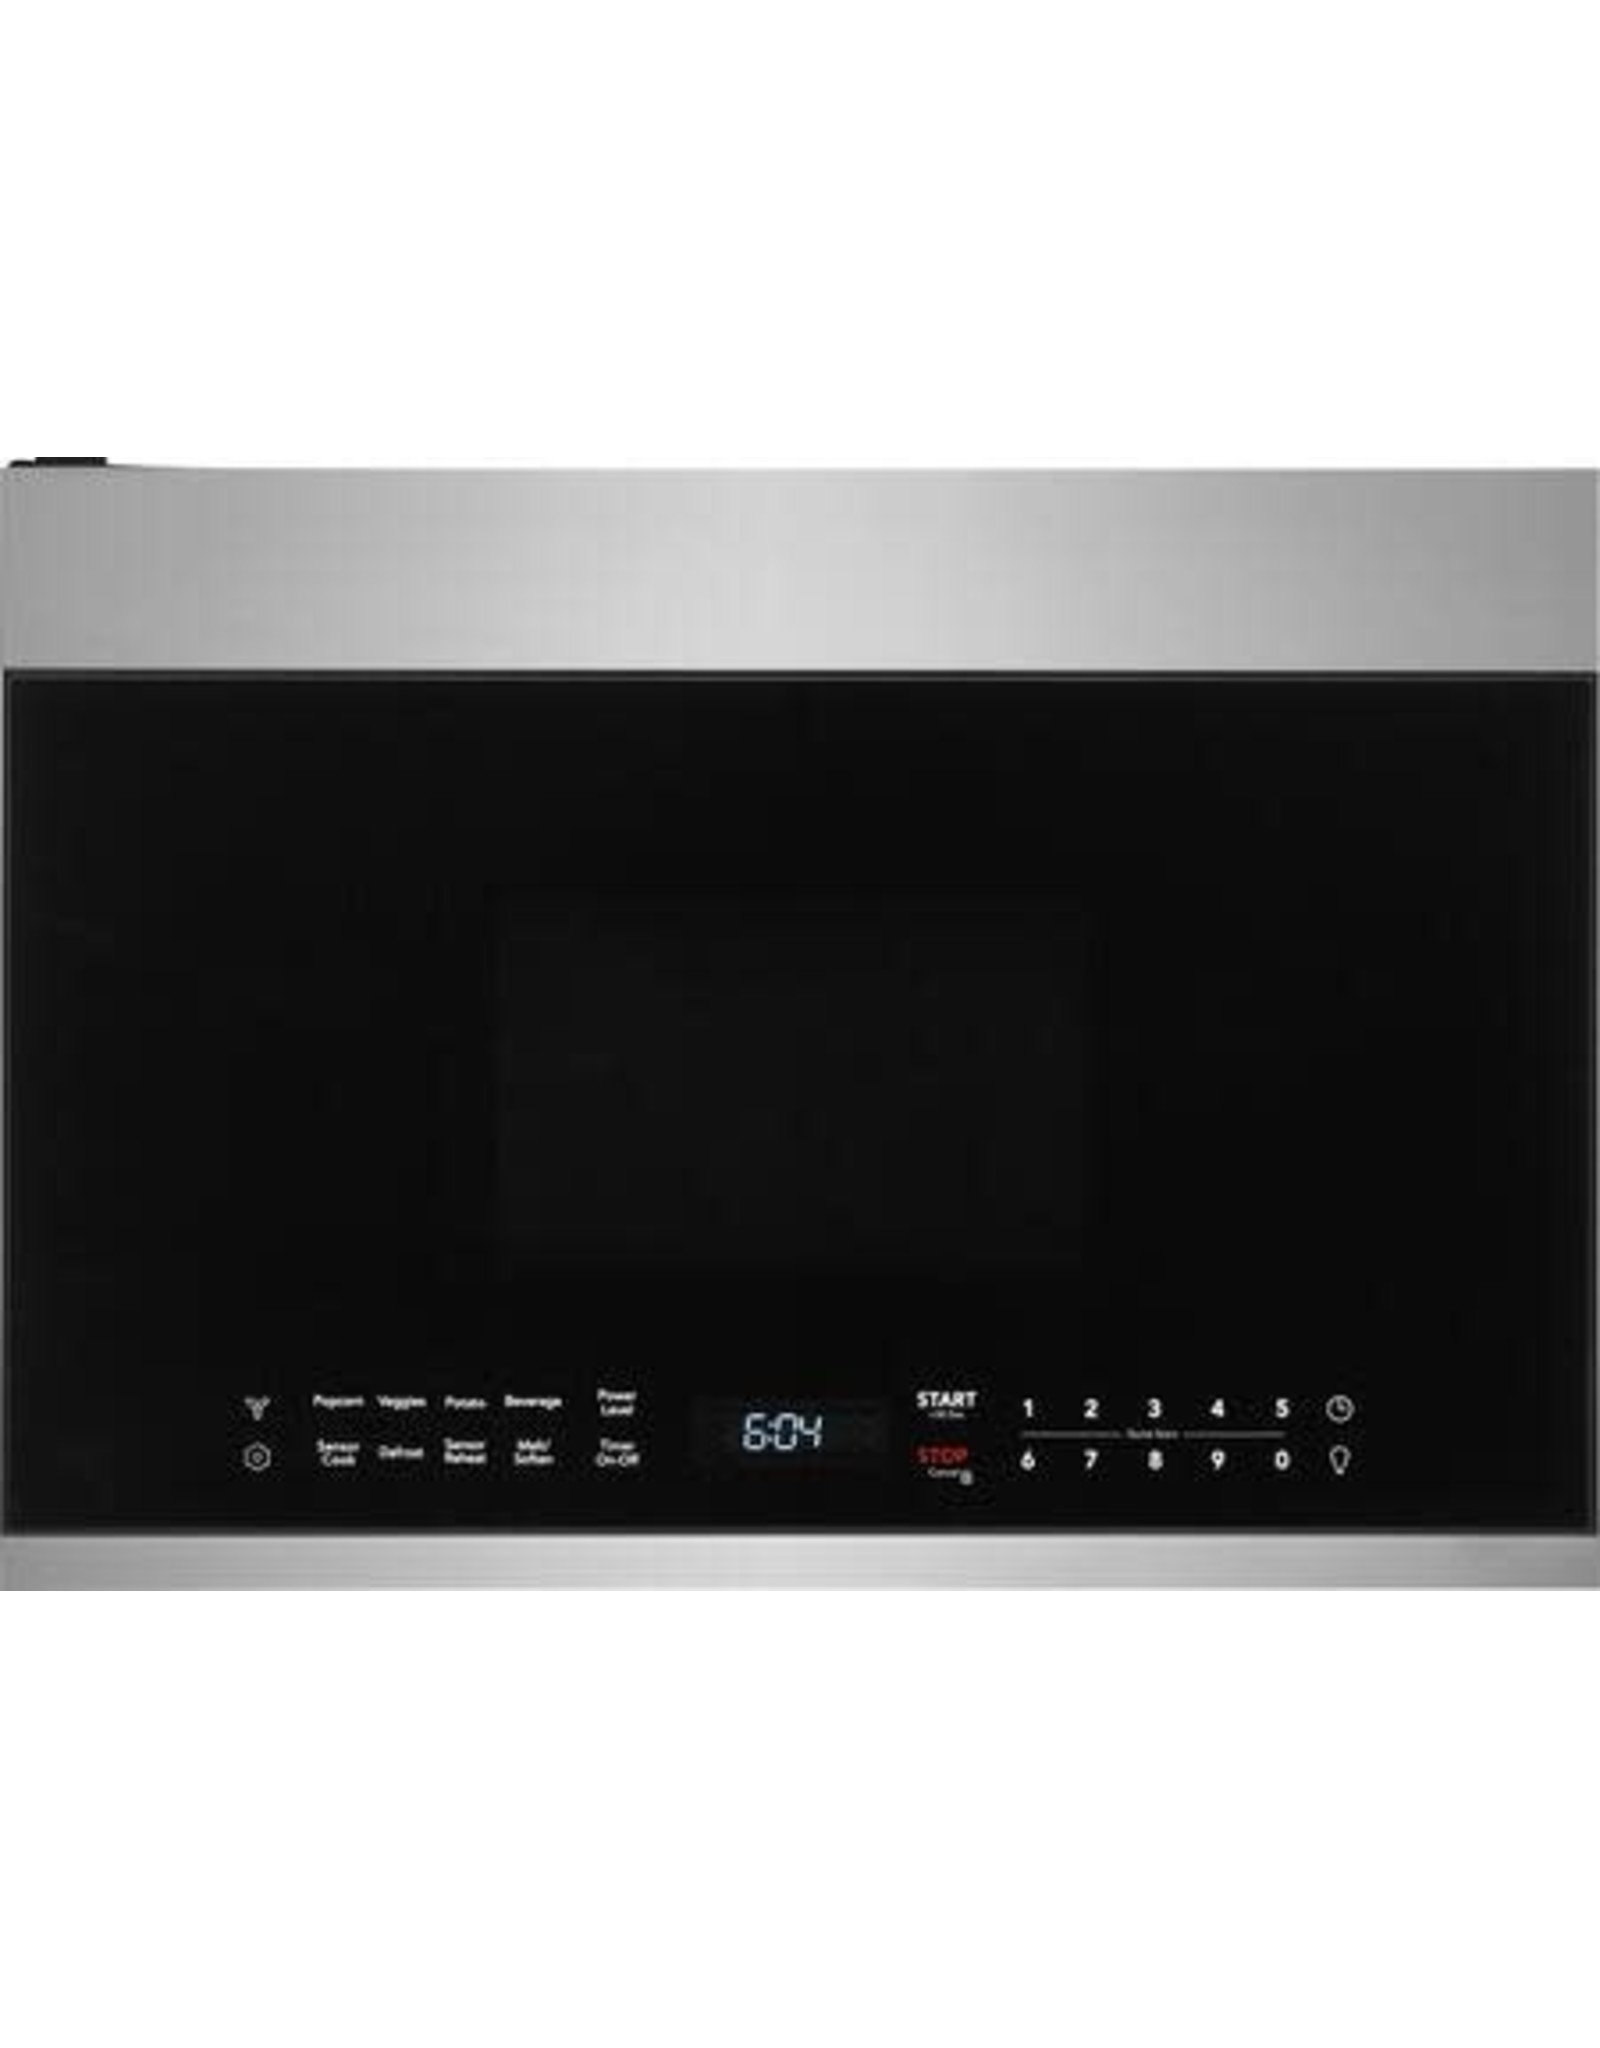 UMV1422US 1.4 cu. ft. Over-the-Range Microwave in Stainless Steel with Automatic Sensor Cooking Technology